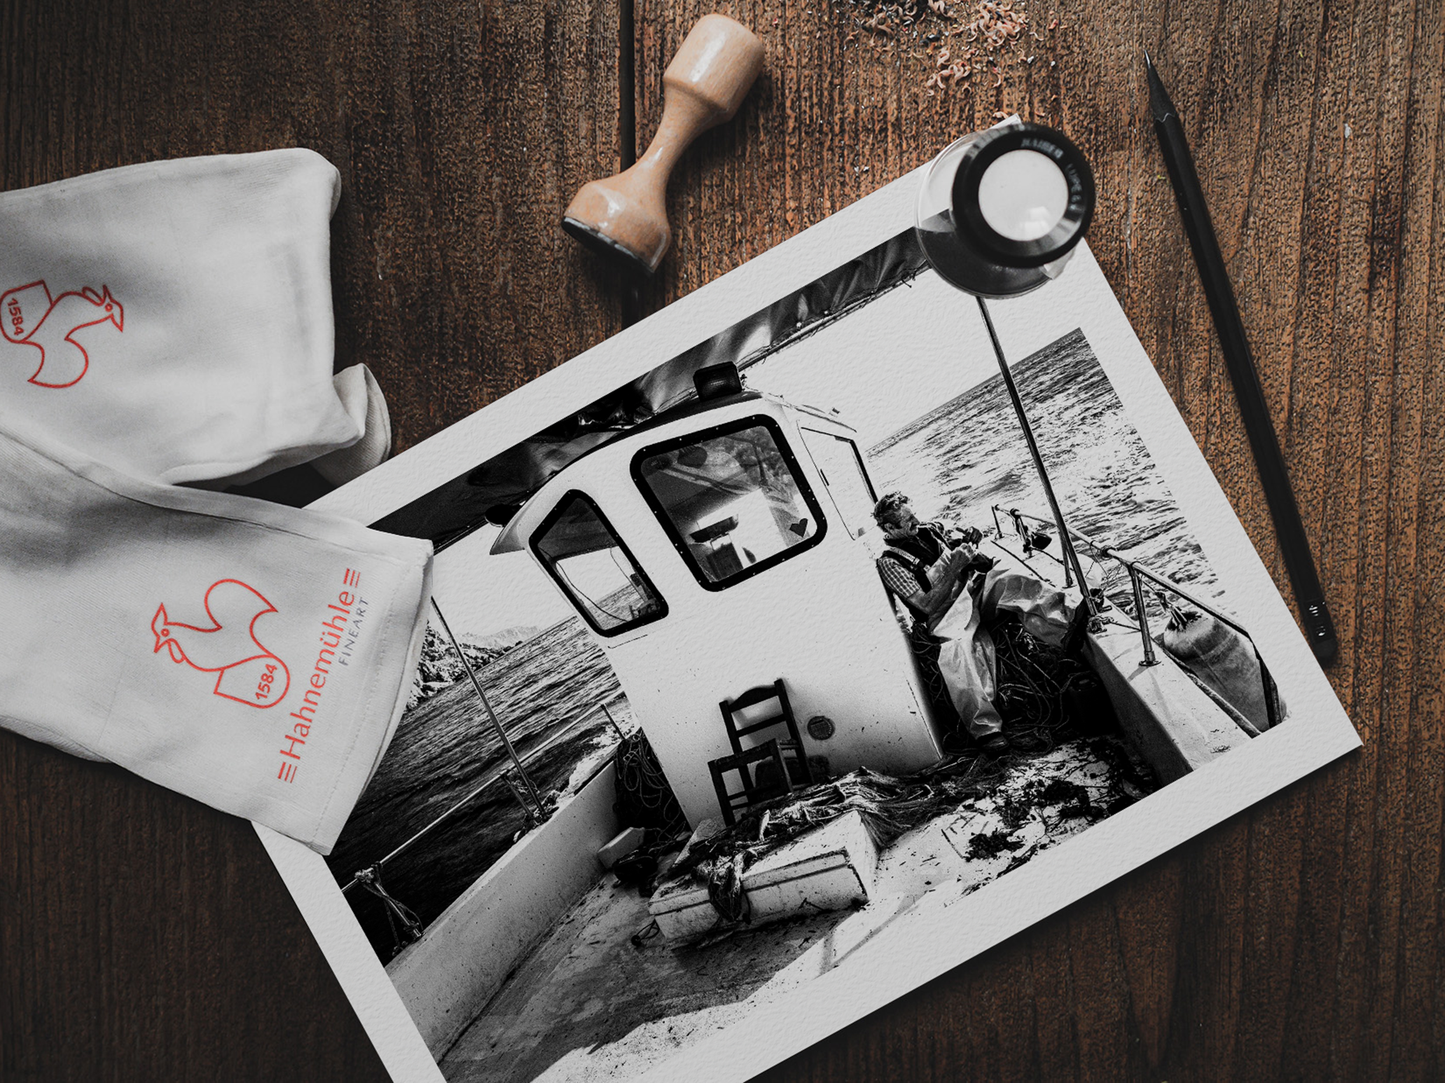 Black and White Photography Wall Art Greece | Fisherman smoking on his boat in Diafani Olympos Karpathos Dodecanese by George Tatakis - photo print on table